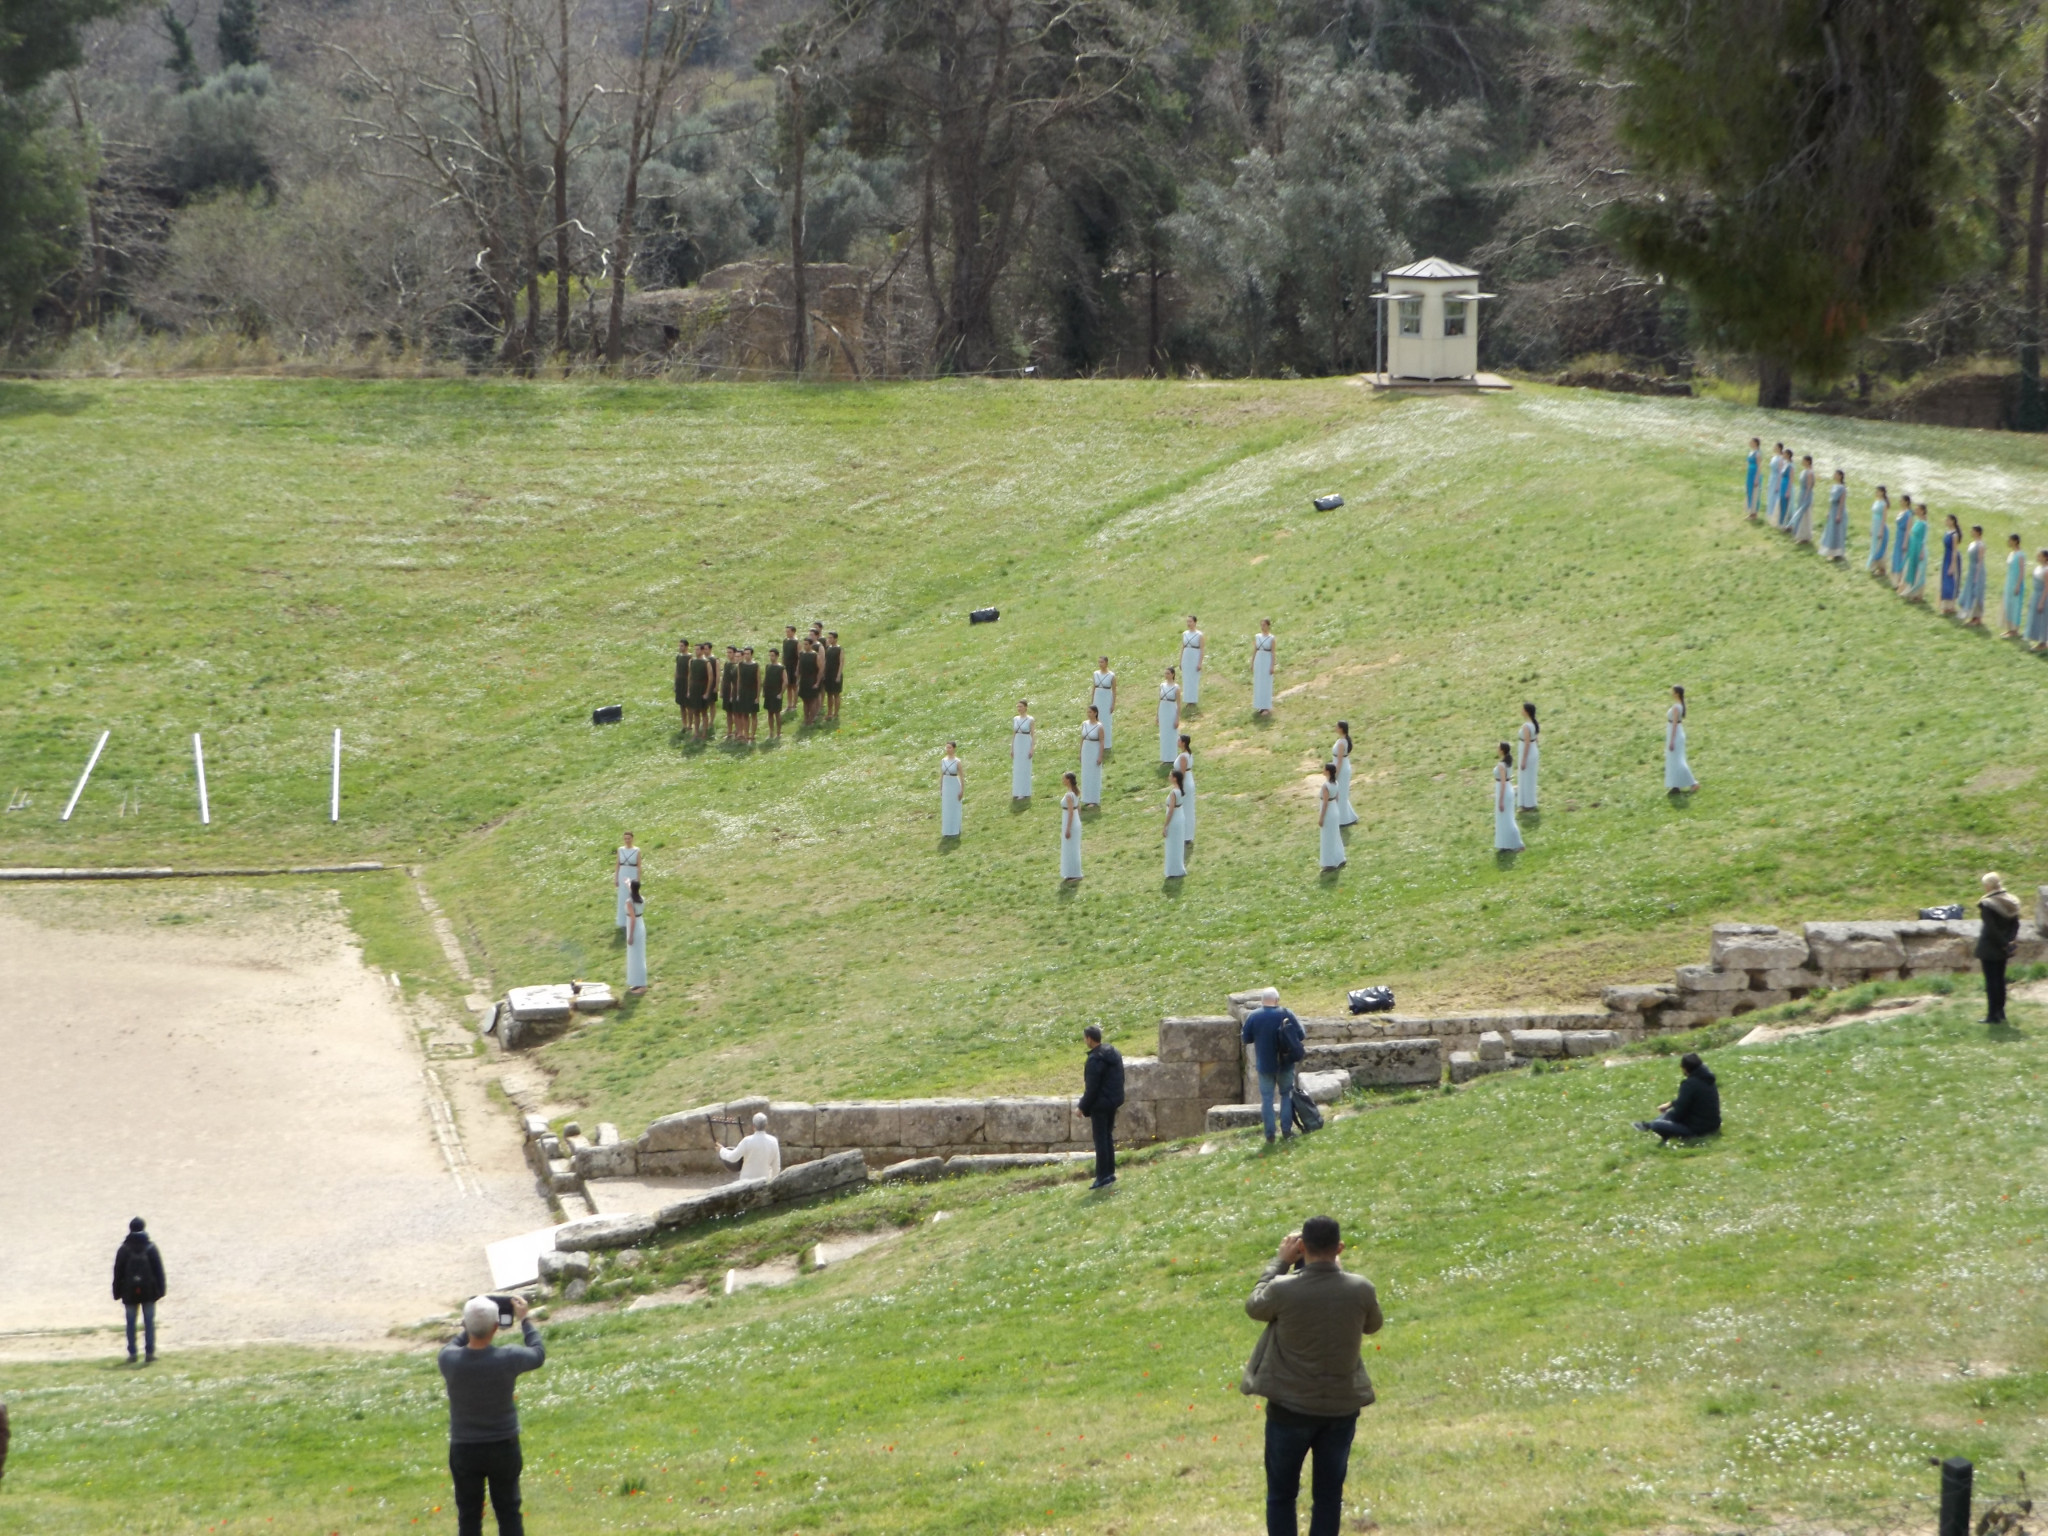 The penultimate rehearsal for the Olympic flame lighting Ceremony took place in ancient Olympia today ©ITG